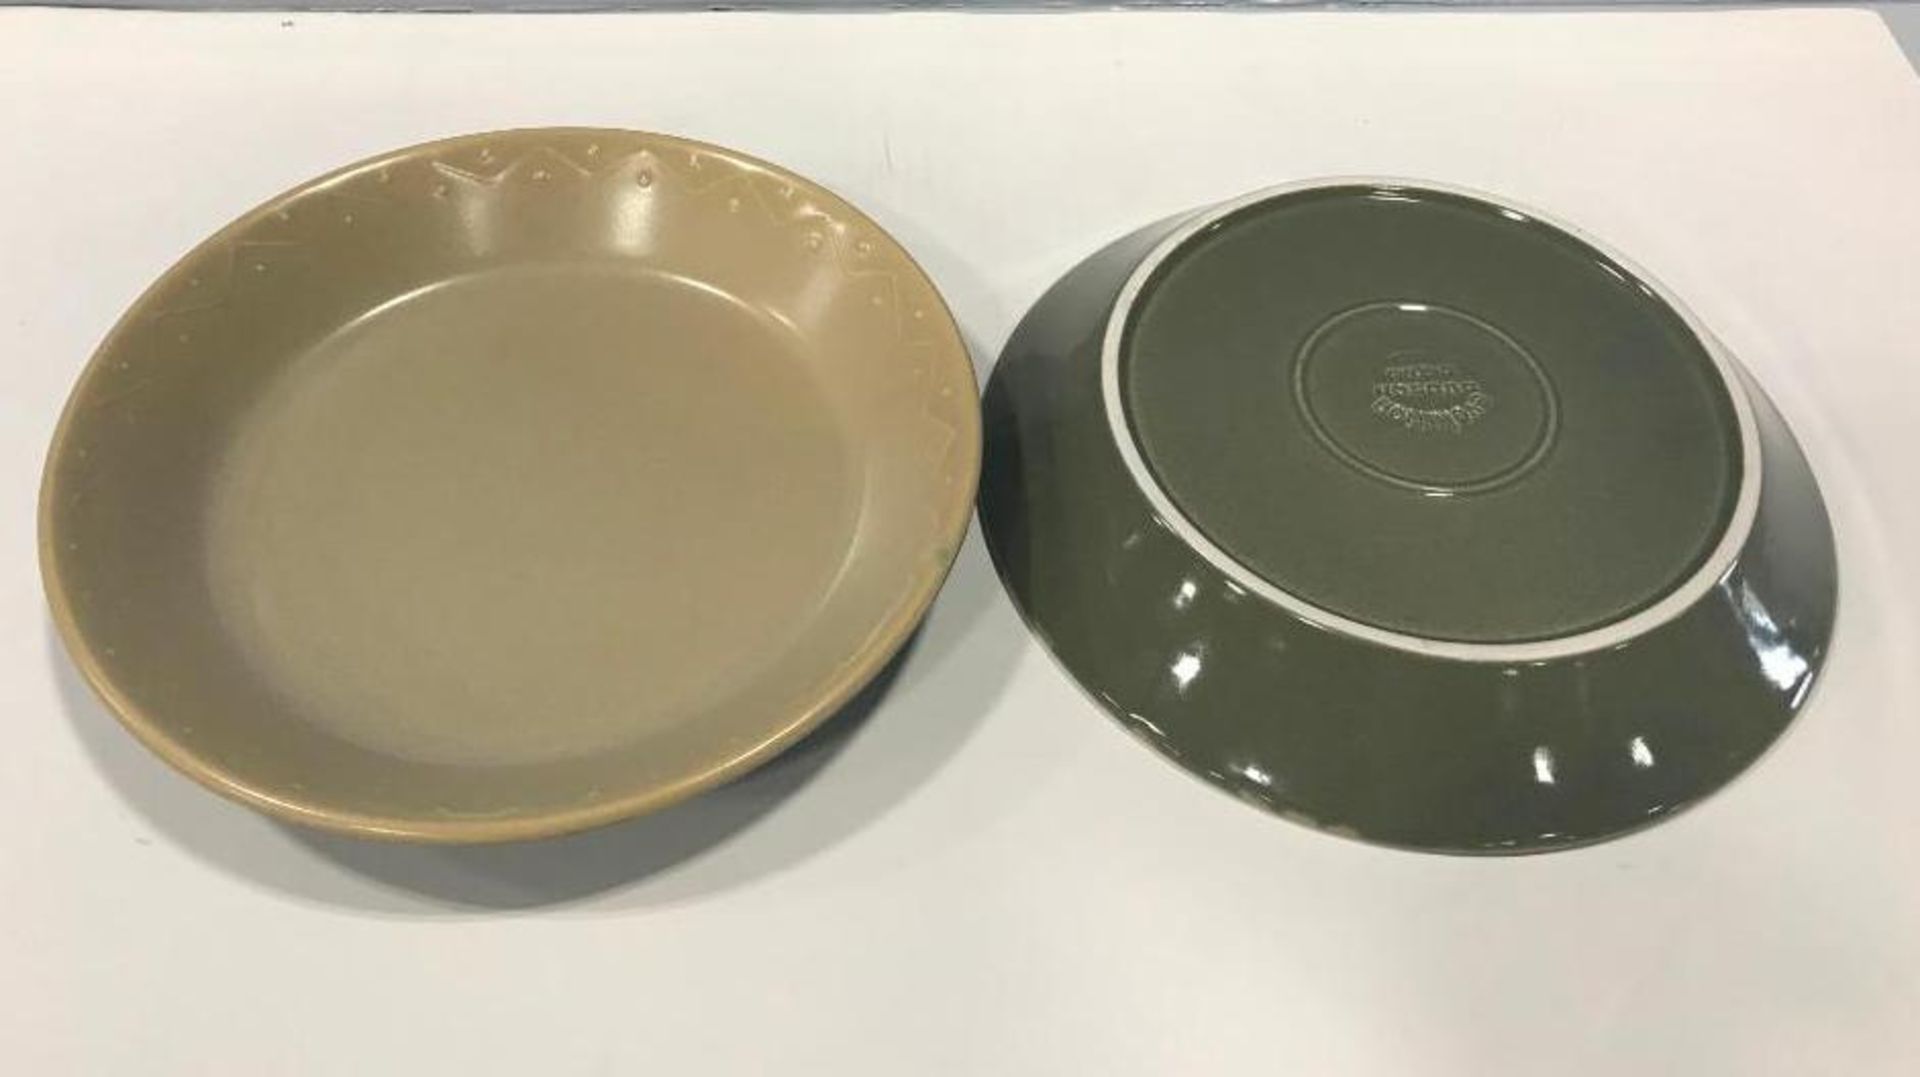 DUDSON GREEN & SAND SALAD BOWL 9.5" - 18/CASE, MADE IN ENGLAND